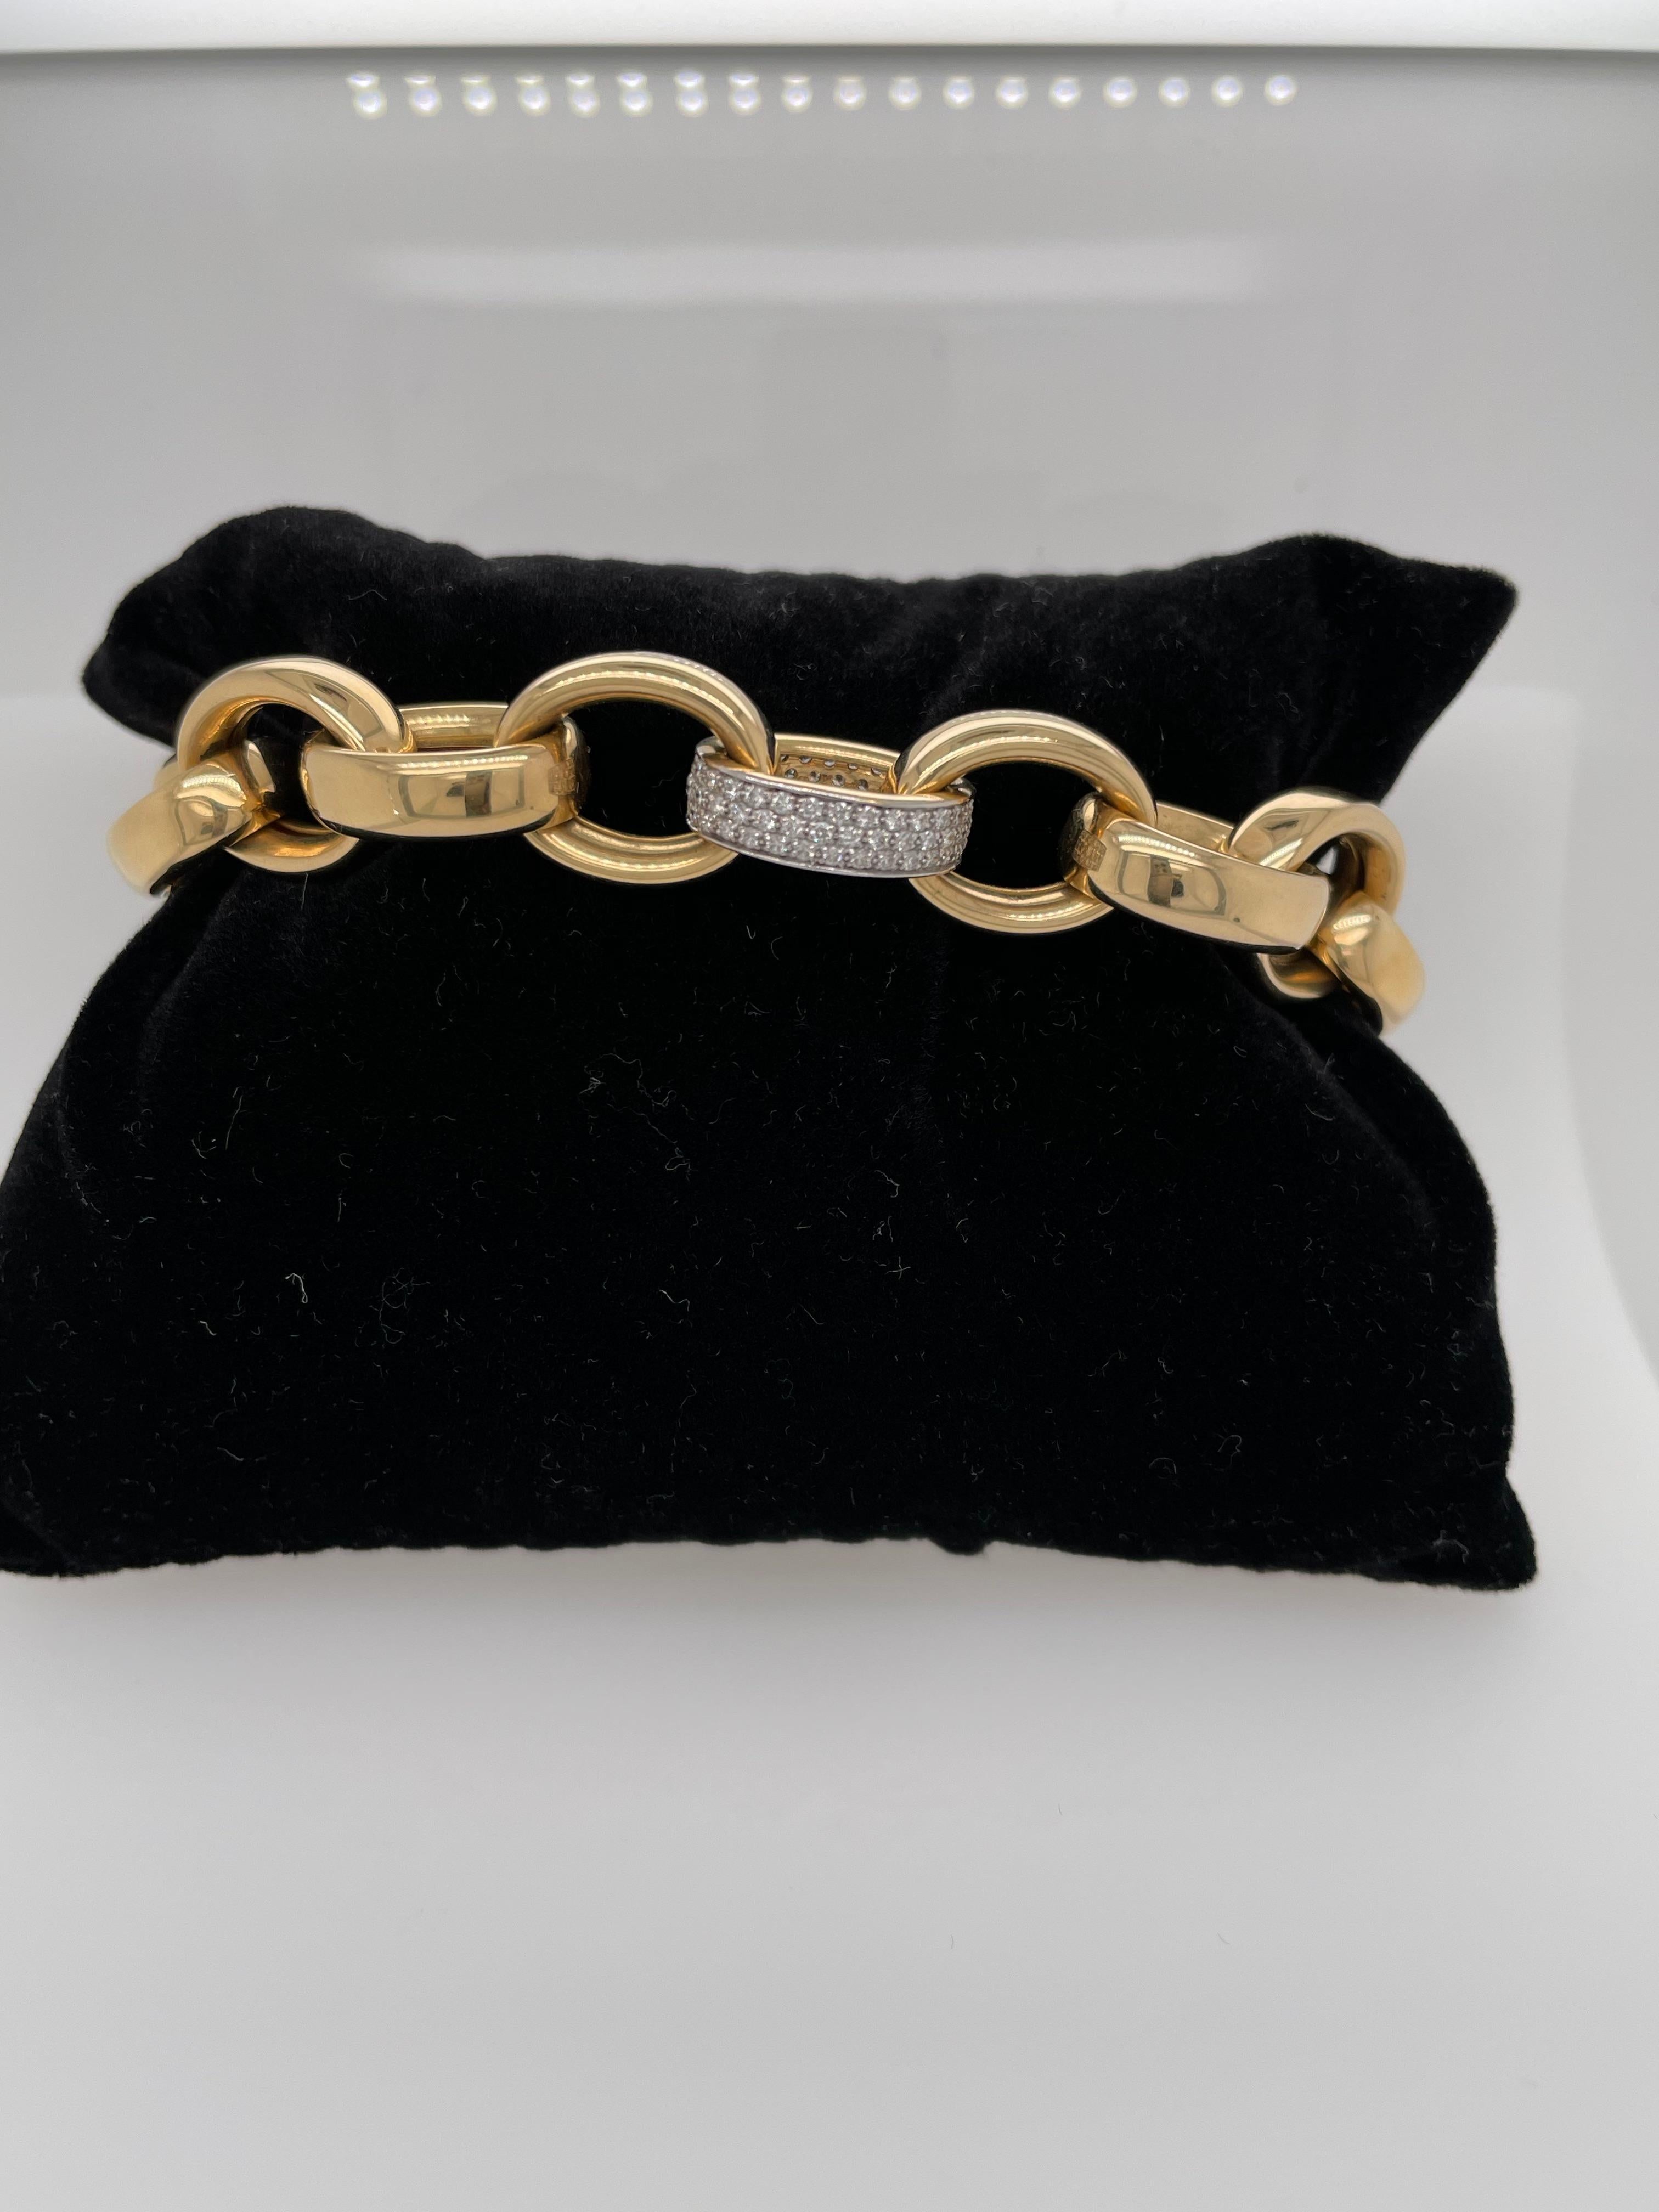 Gorgeous and super chic!  This Monica Rich Kosann is comprised of 18K yellow gold and diamonds.  The 18K Extra-large Ultra Bracelet has  a safety clasp on the catch and is adjoined with a diamond pave link.  The diamond carat weight totals .63 total